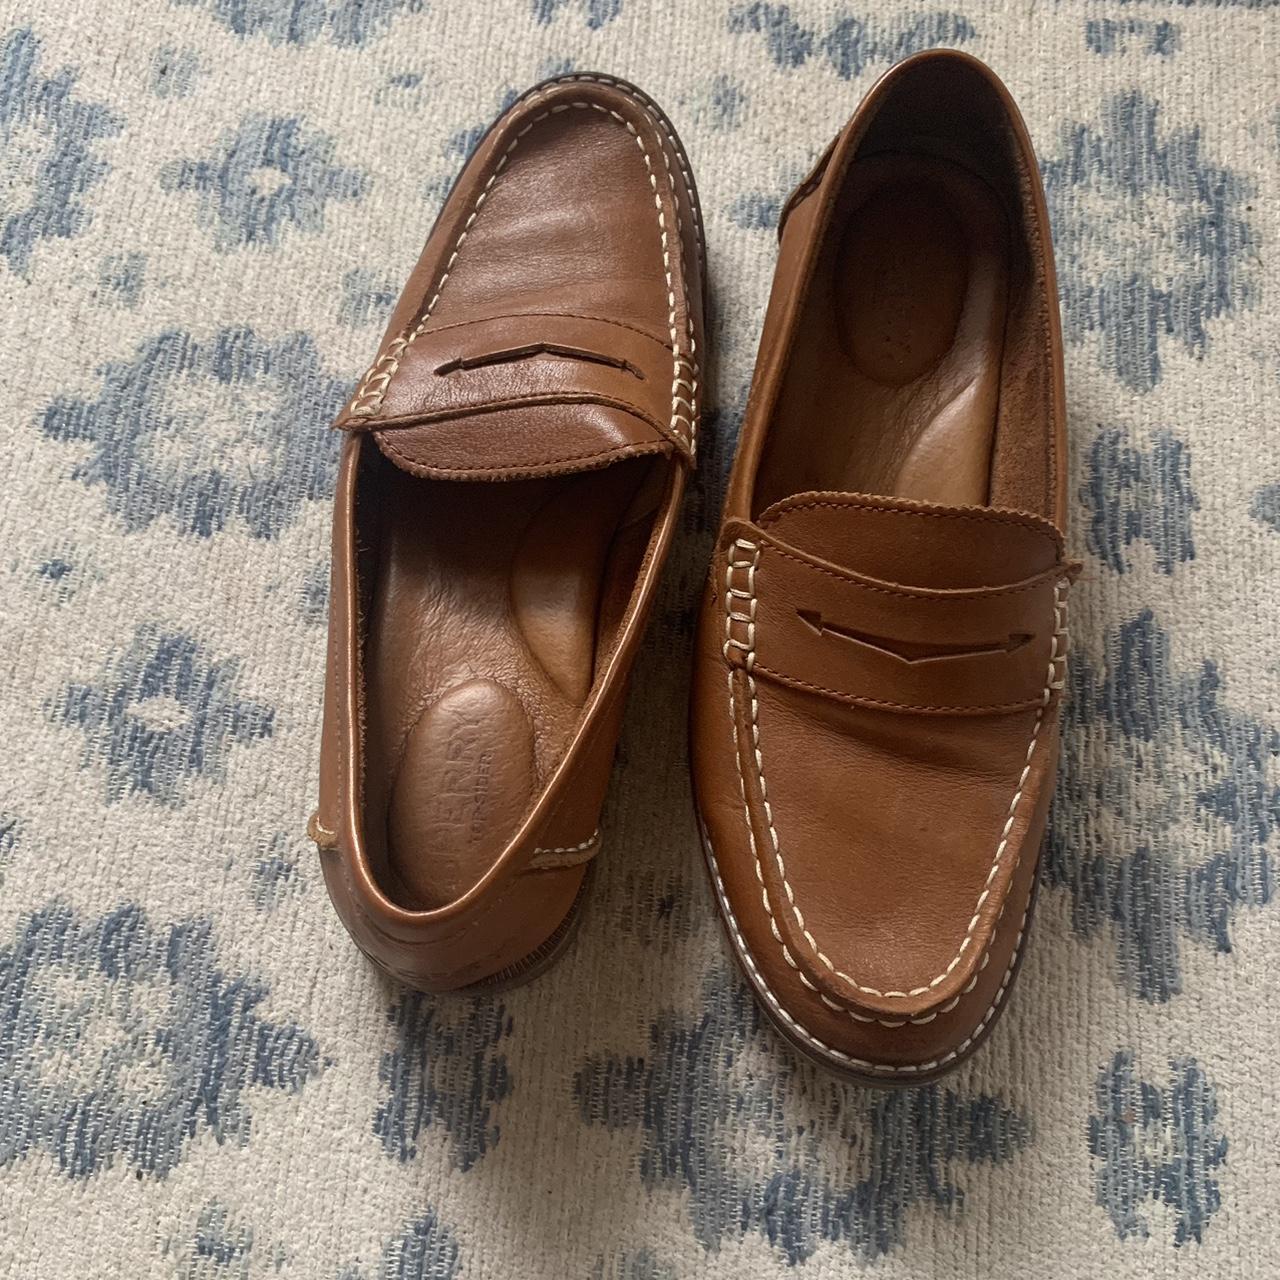 Sperry Women's Brown Oxfords